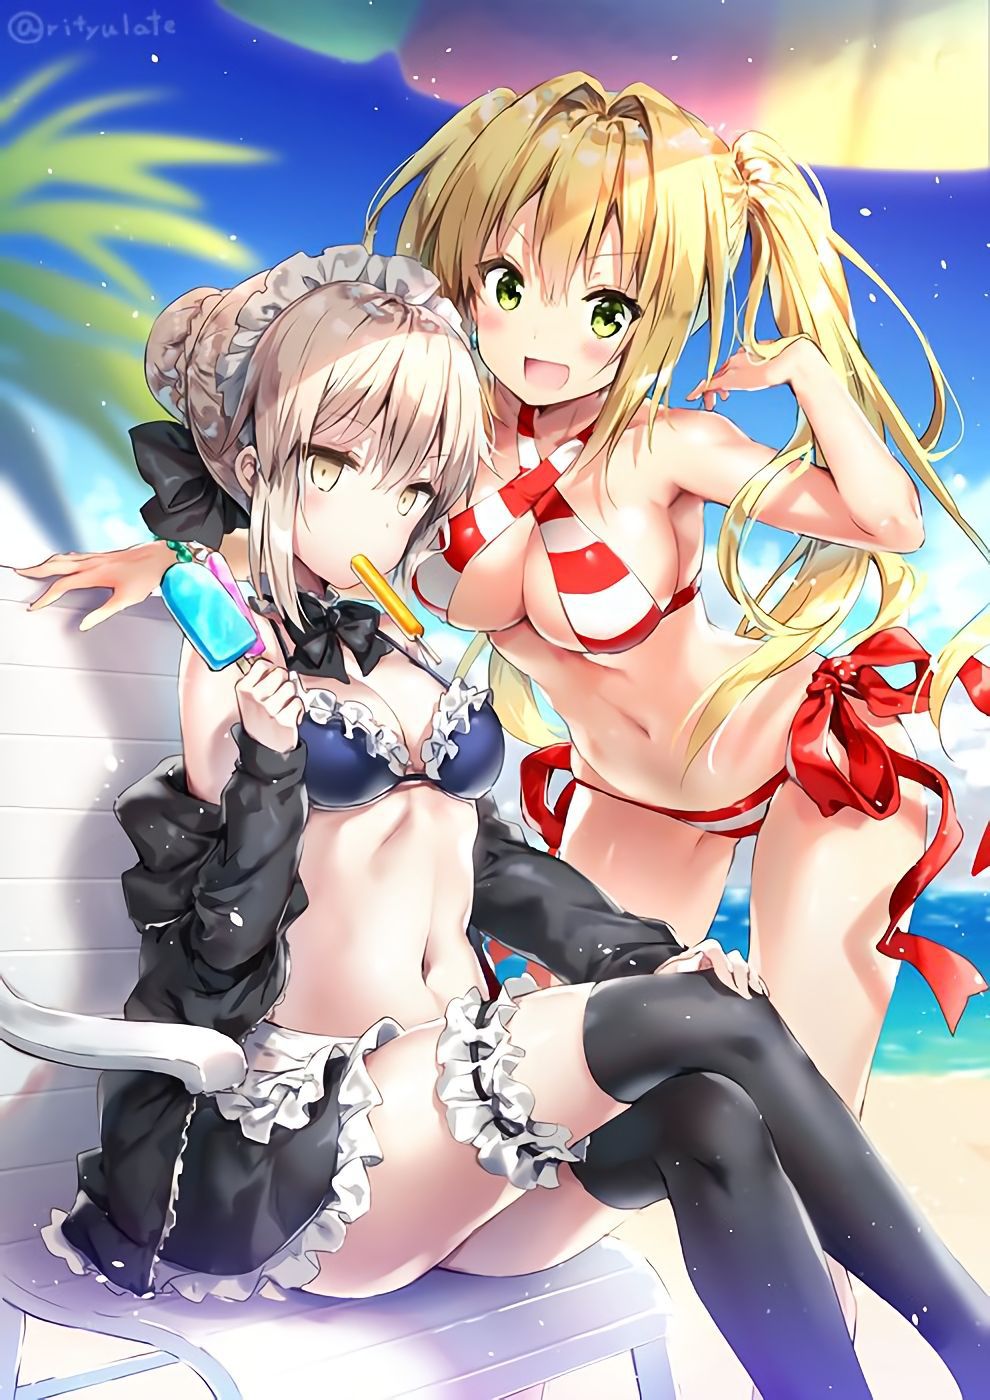 [Secondary ZIP] is about to start anime 100 pieces of cute image summary of Nero Claudius so soon 22